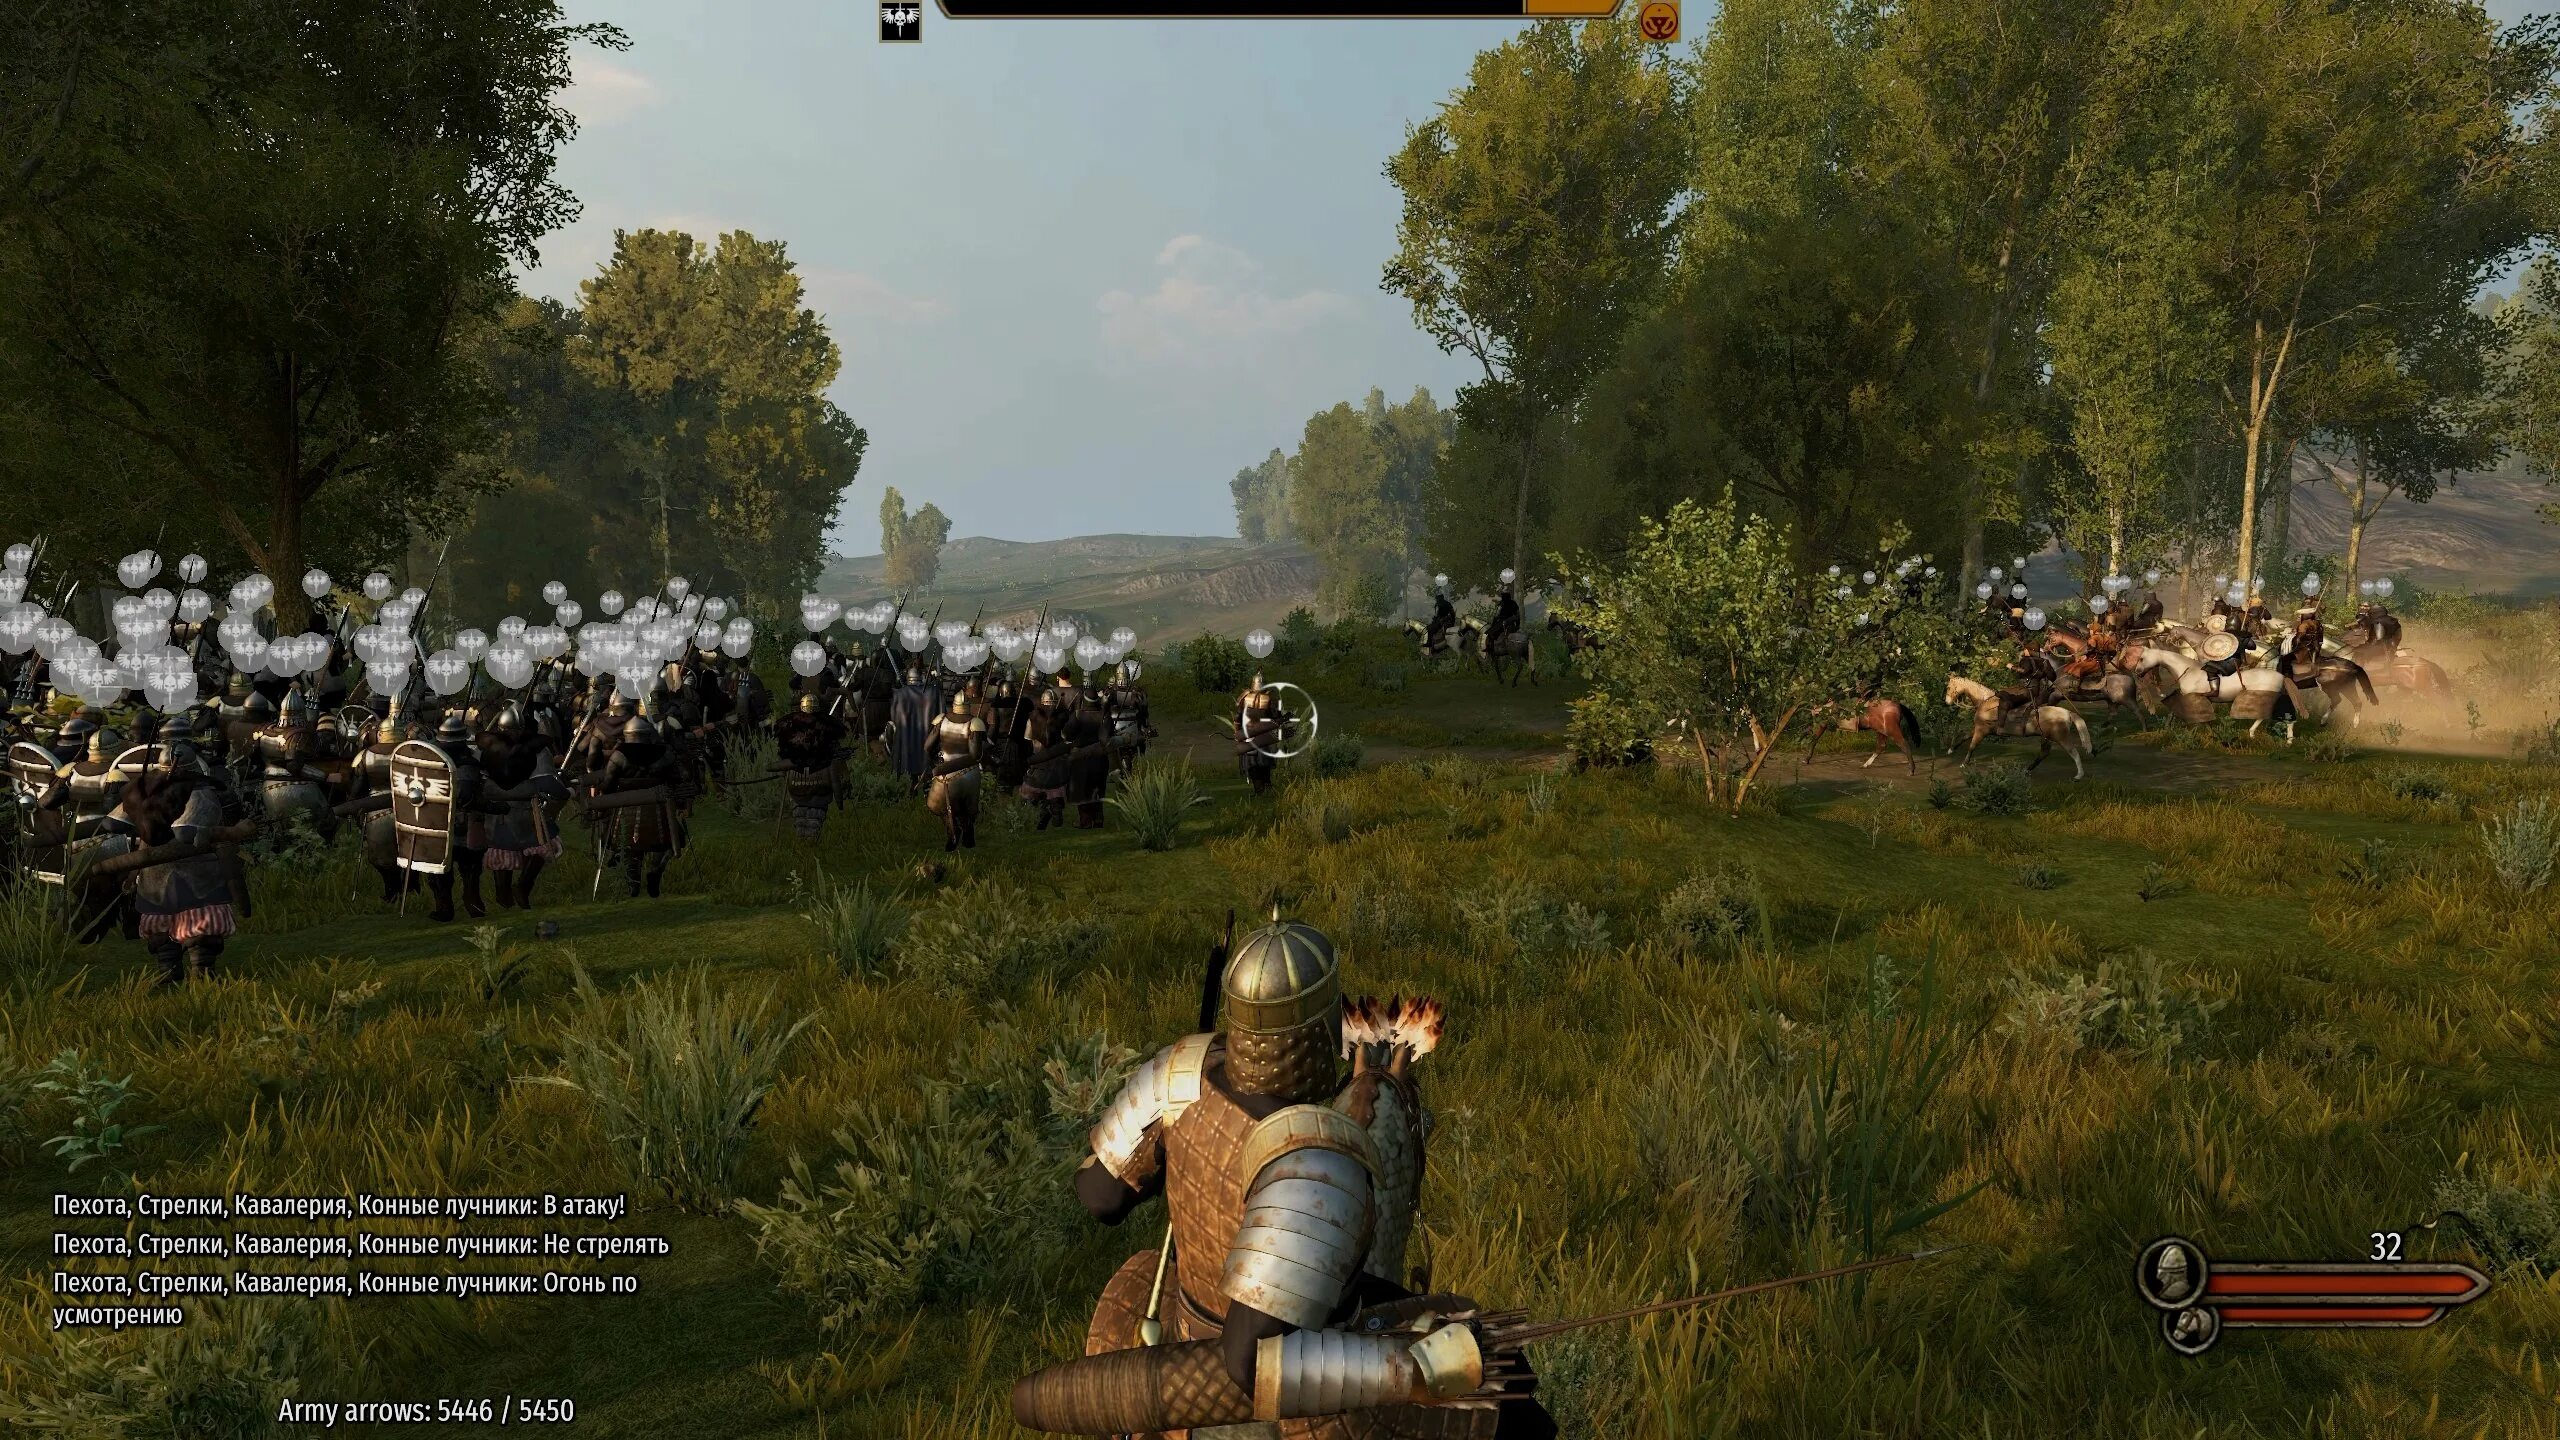 Mount and Blade 2. Mount and Blade 2 Bannerlord города. Mount and Blade 2 Bannerlord личный замок. Города Mount and Blade 2 Bannerlord внутри. Сборка bannerlord 1.2 9